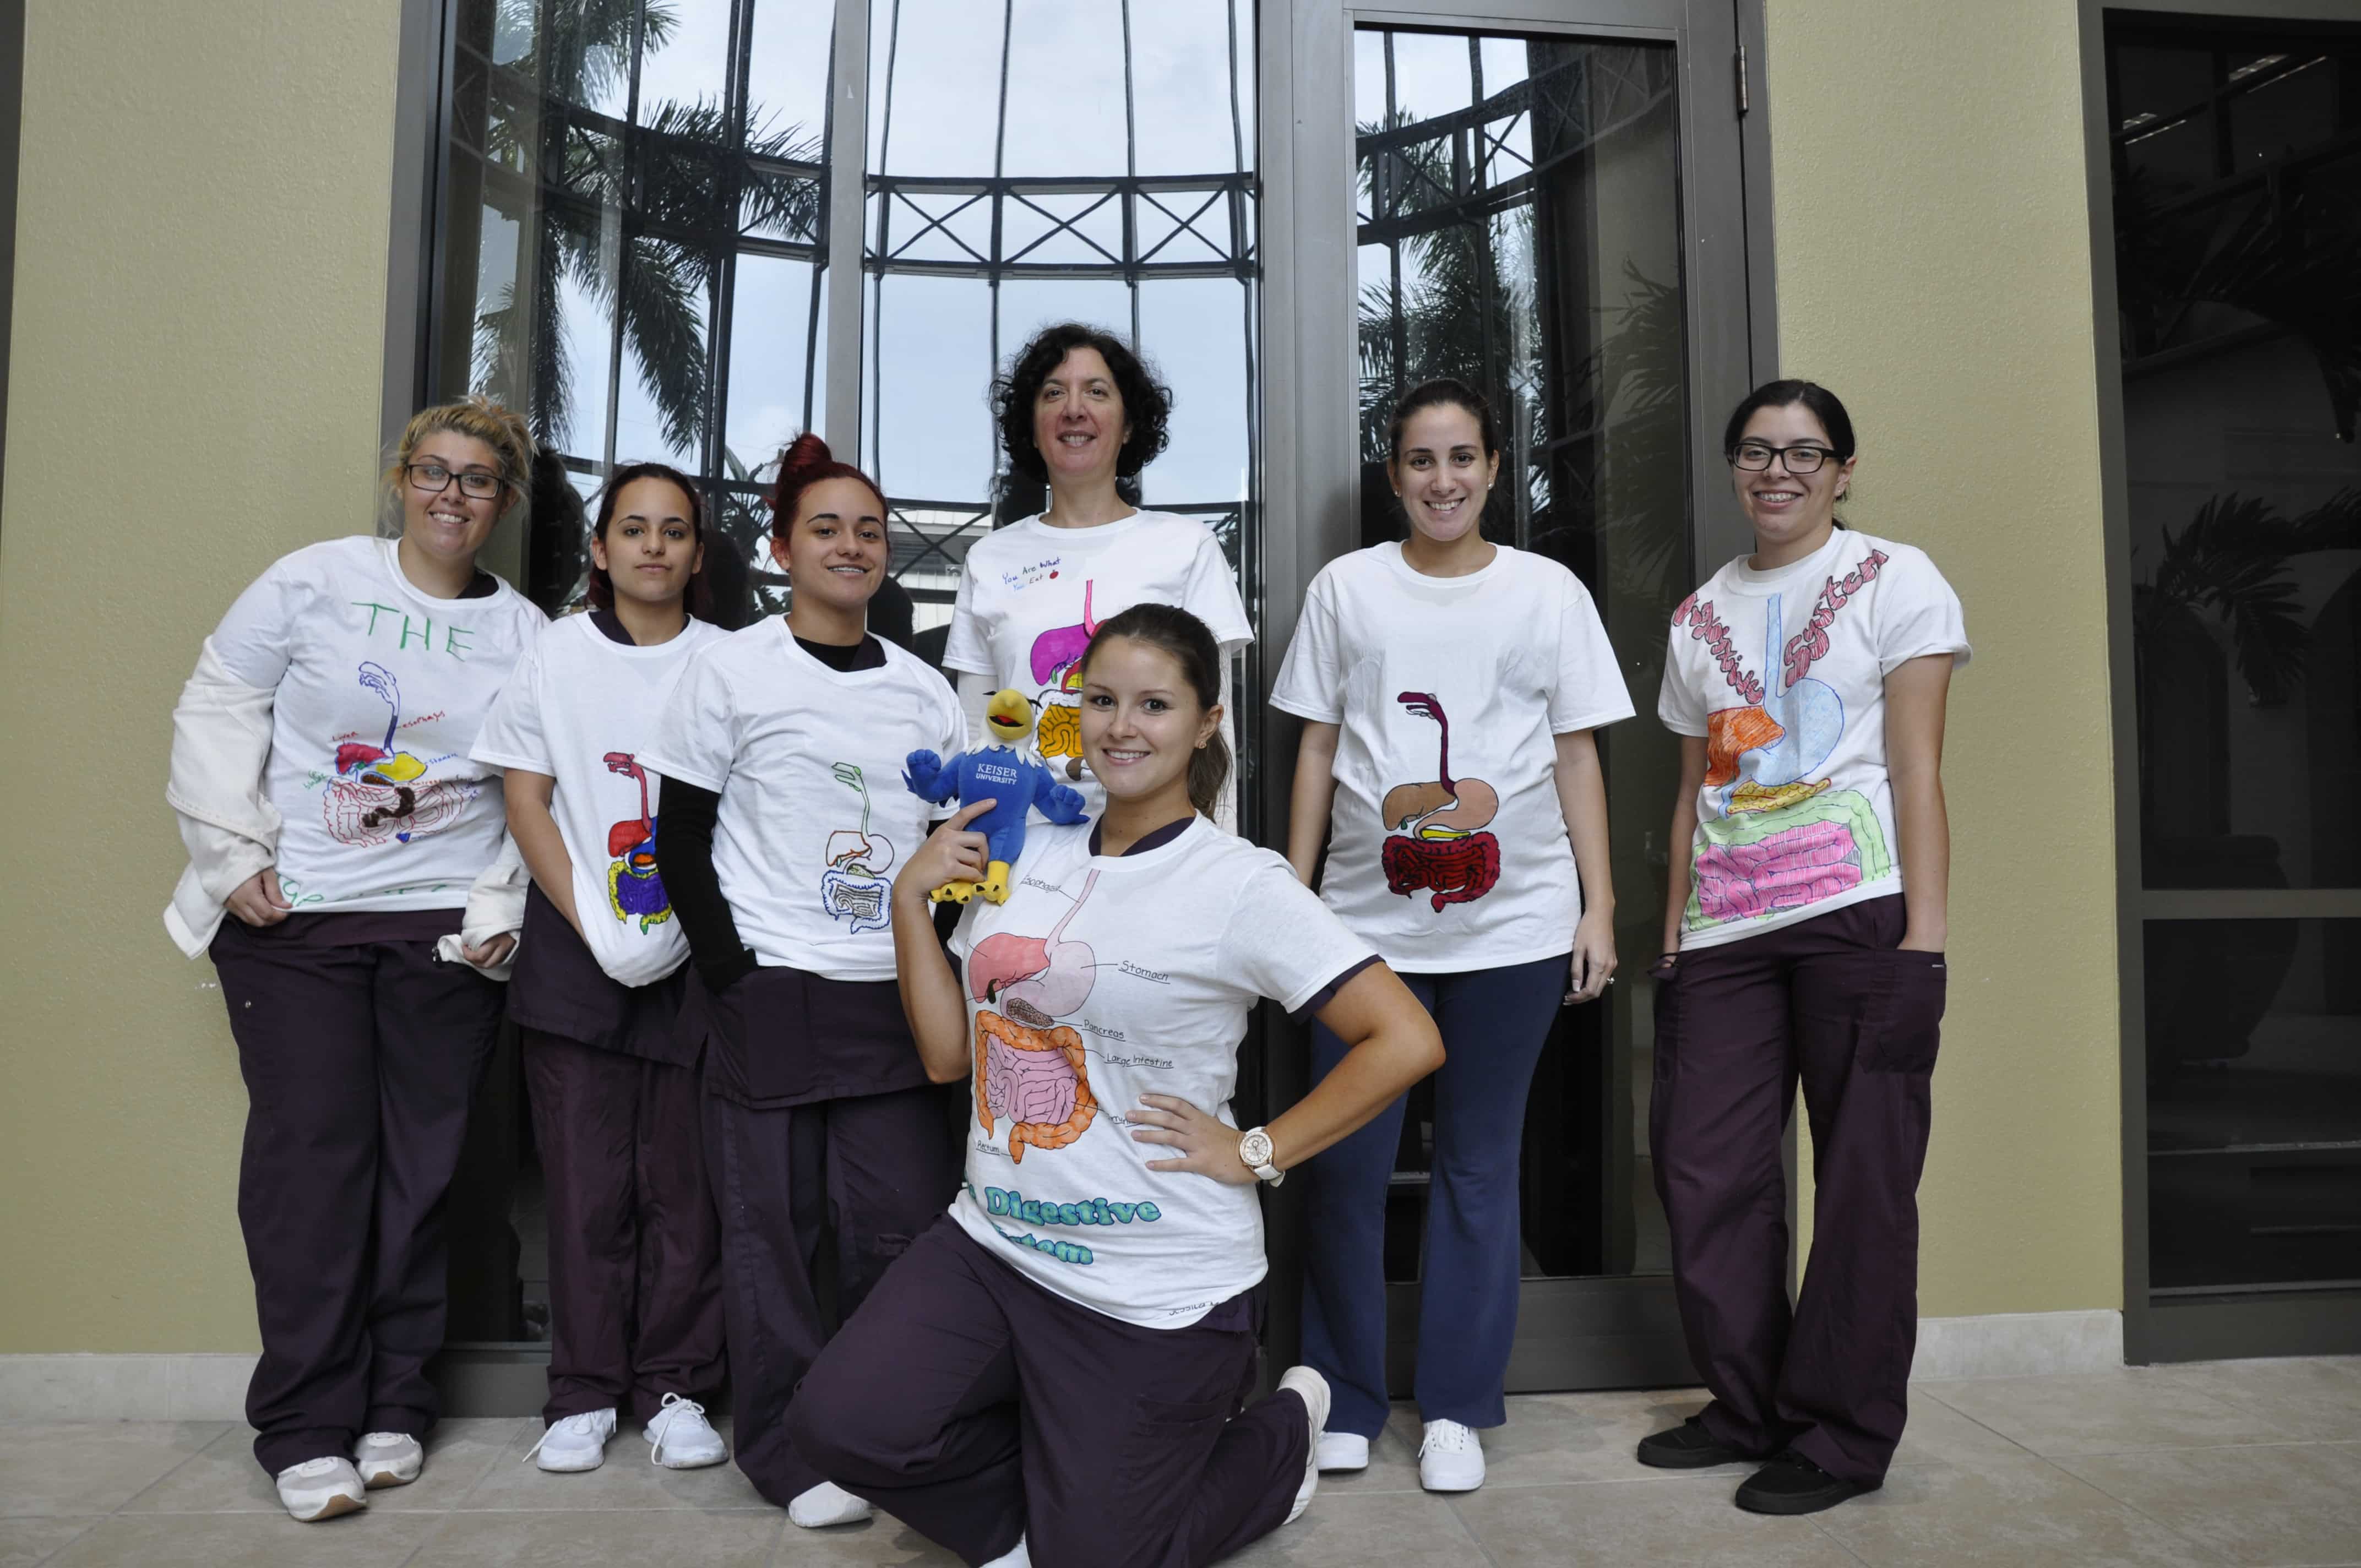 Medical Assisting Students Sell Shirts for Charity